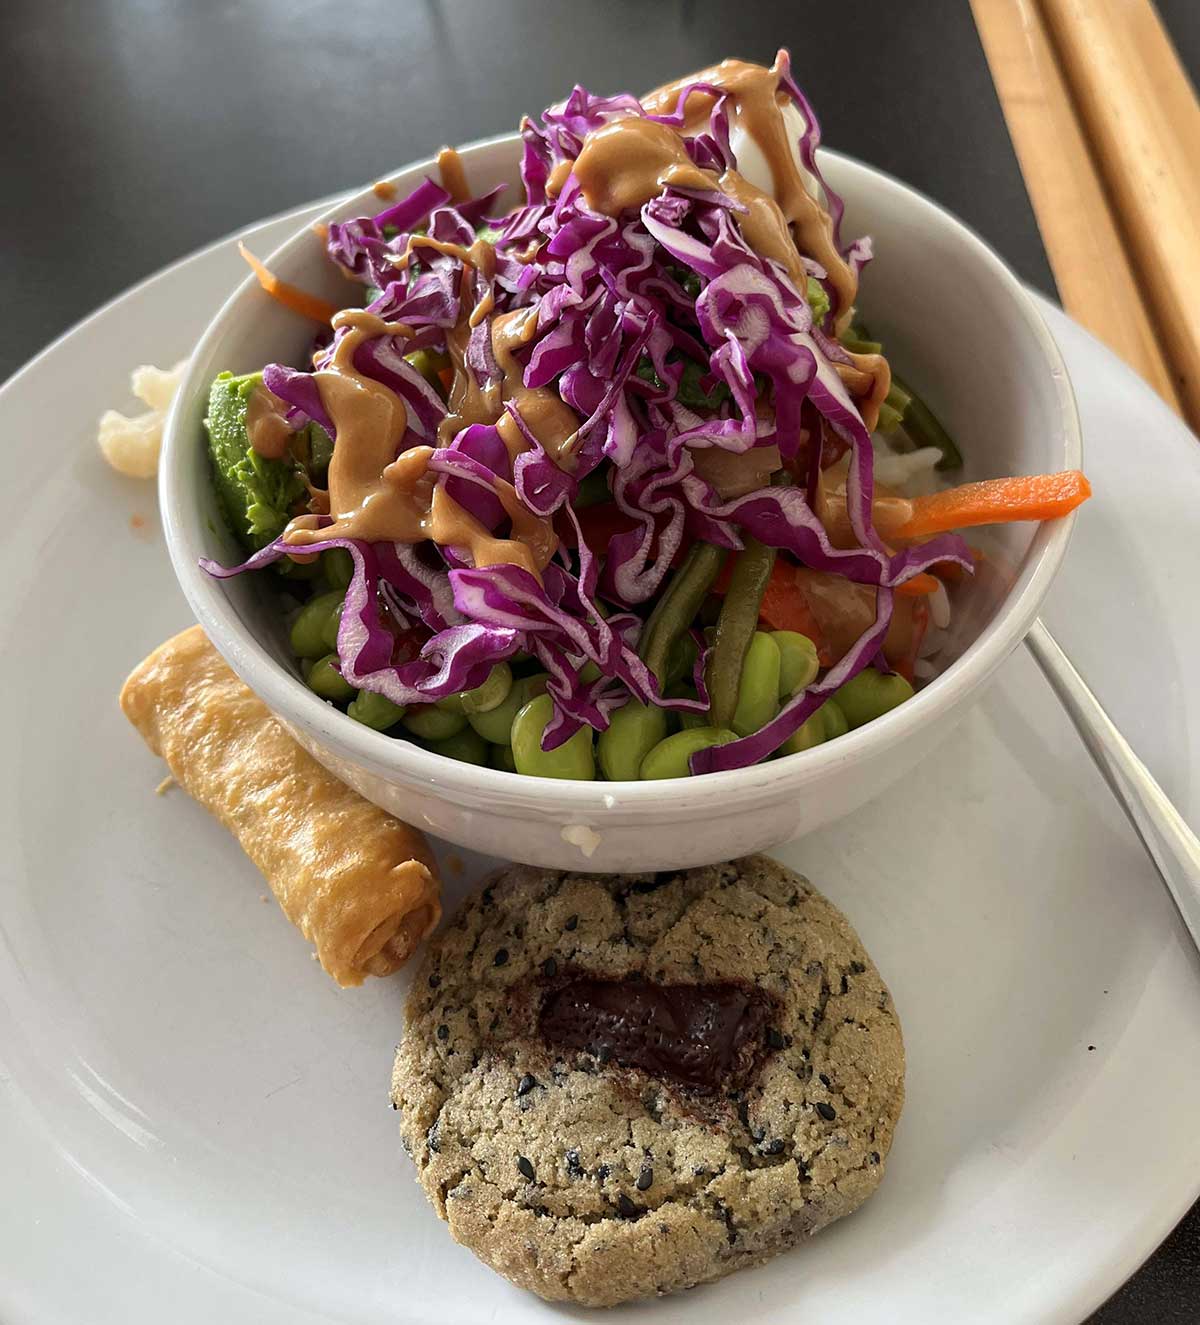 A white ceramic bowl brims with bright green broccoli, fresh edamame bean, strips of red and green sweet pepper, orange carrot shreds all topped with shredded purple cabbage drizzled with a peanut sauce; a fried egg role and fruit filled cookie alongside on plate 